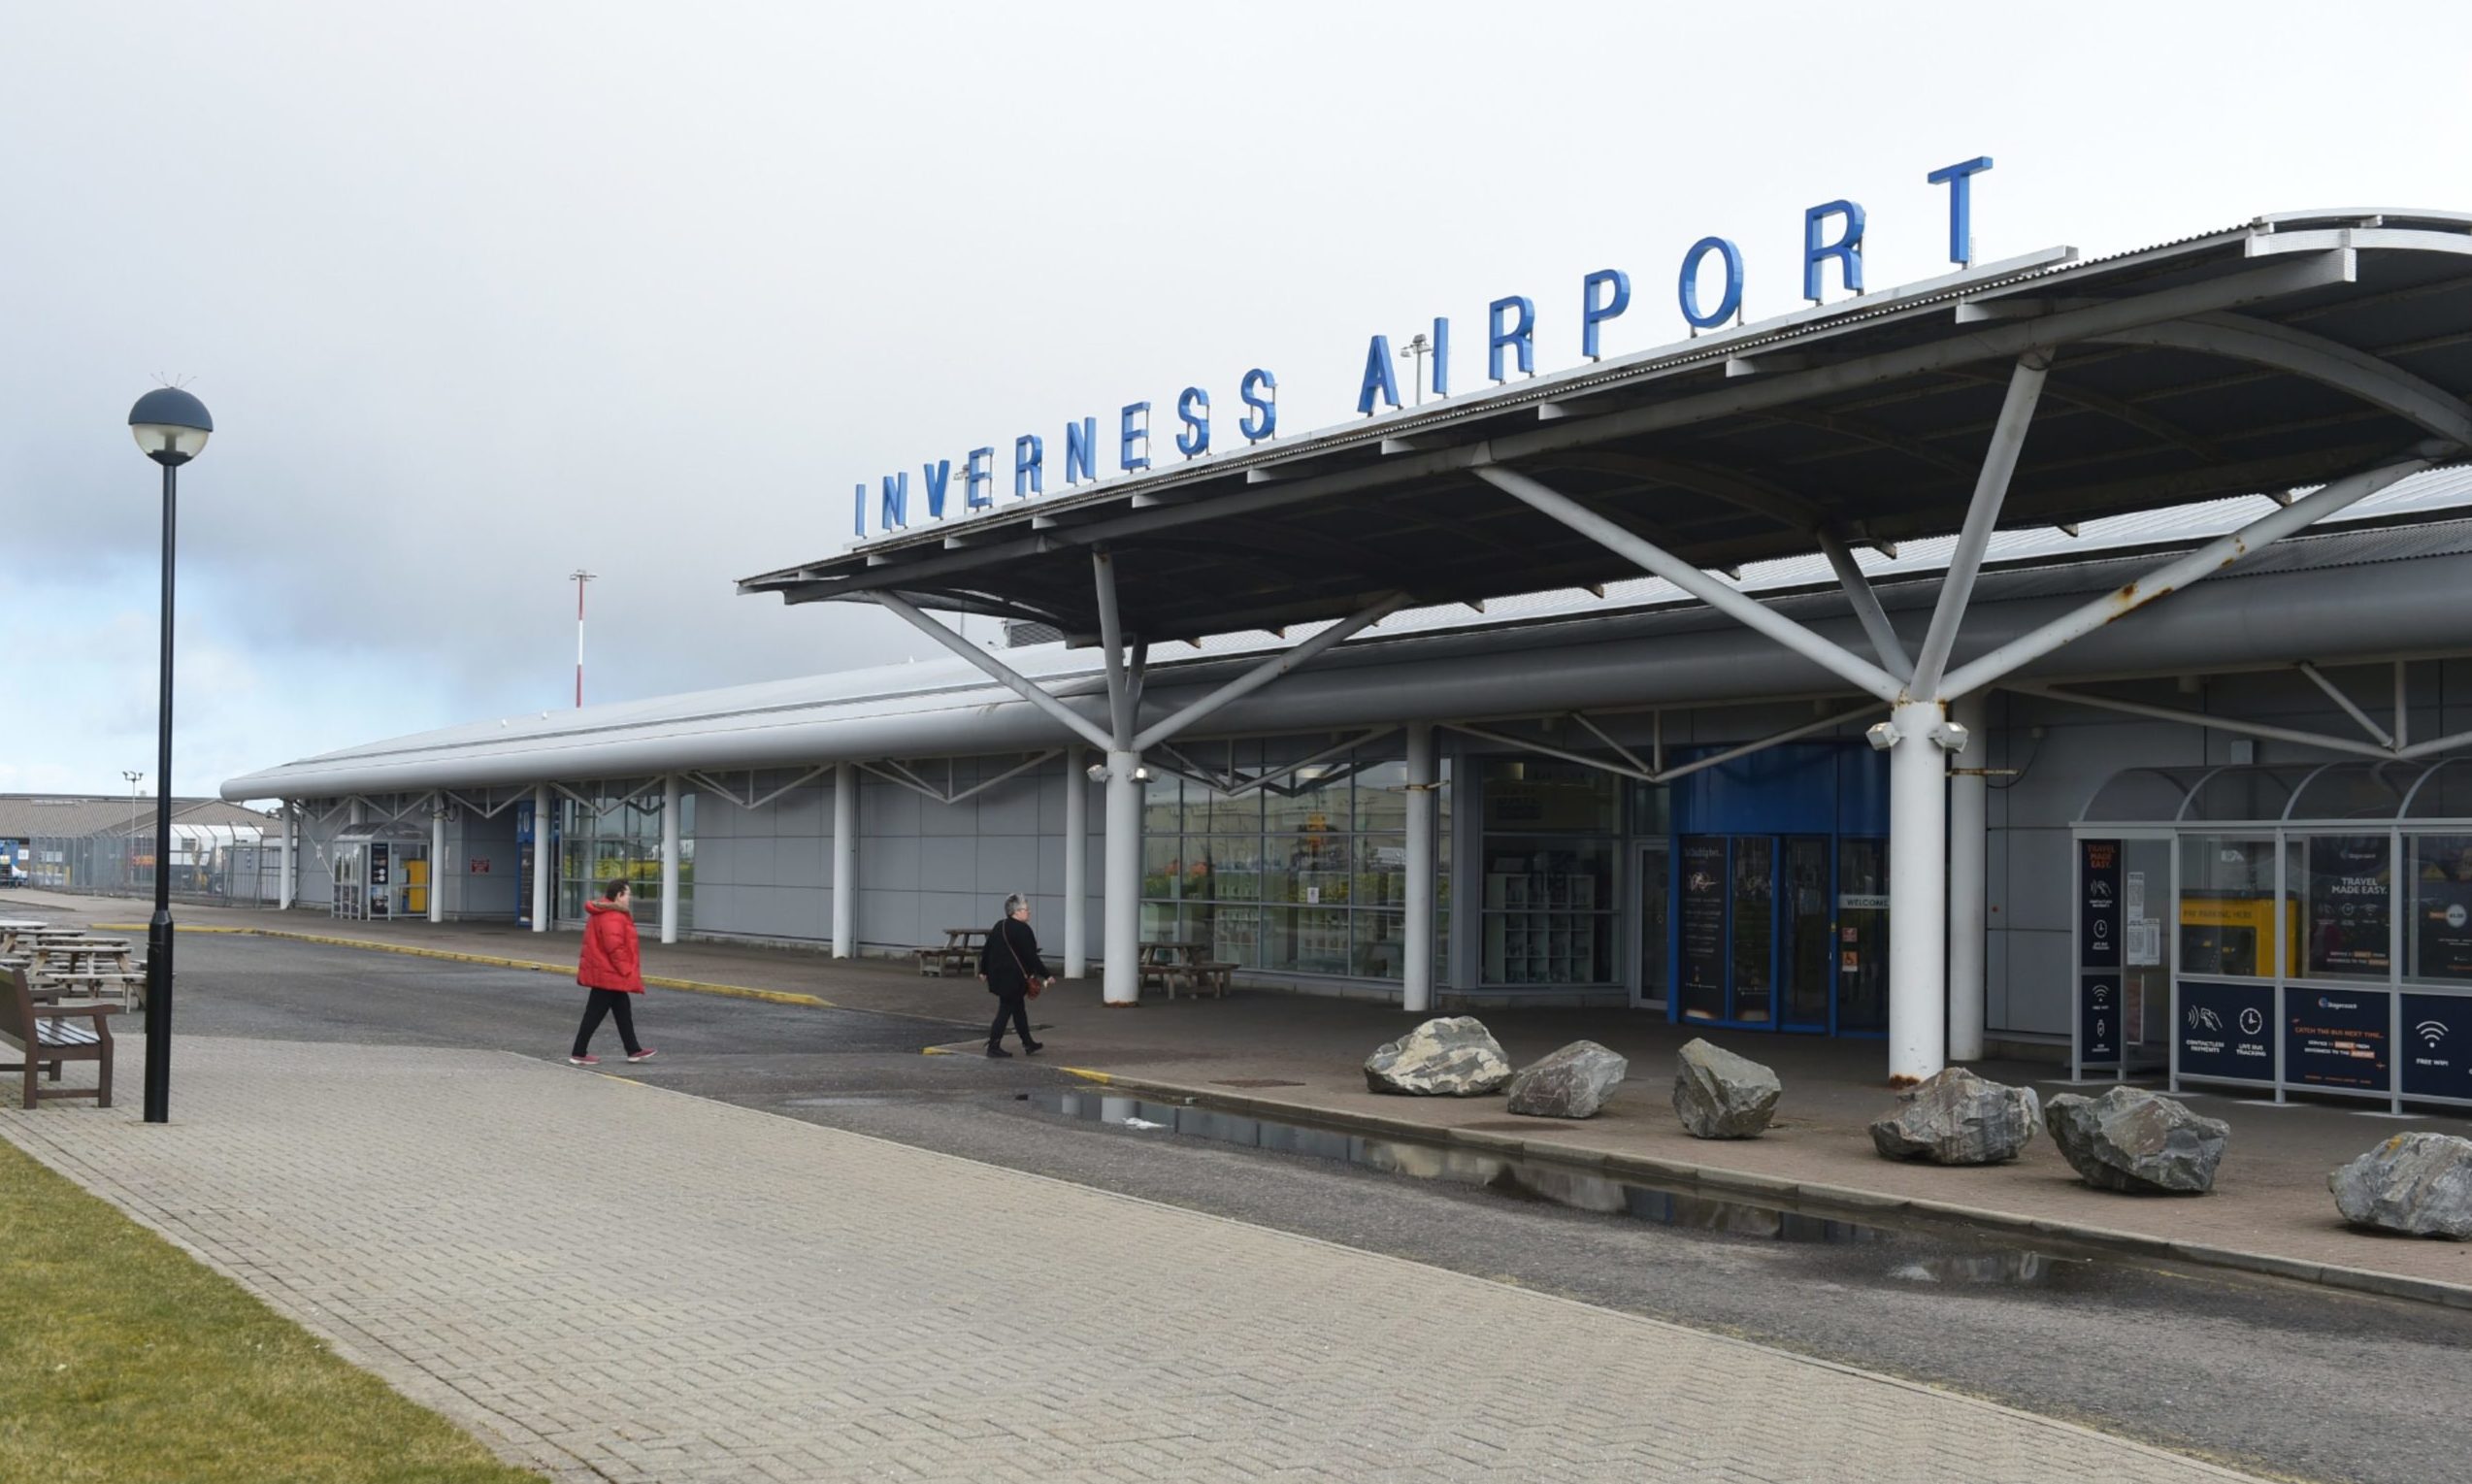 Hial, which operates Inverness Airport, said it will meet any pre-departure testing requirements.